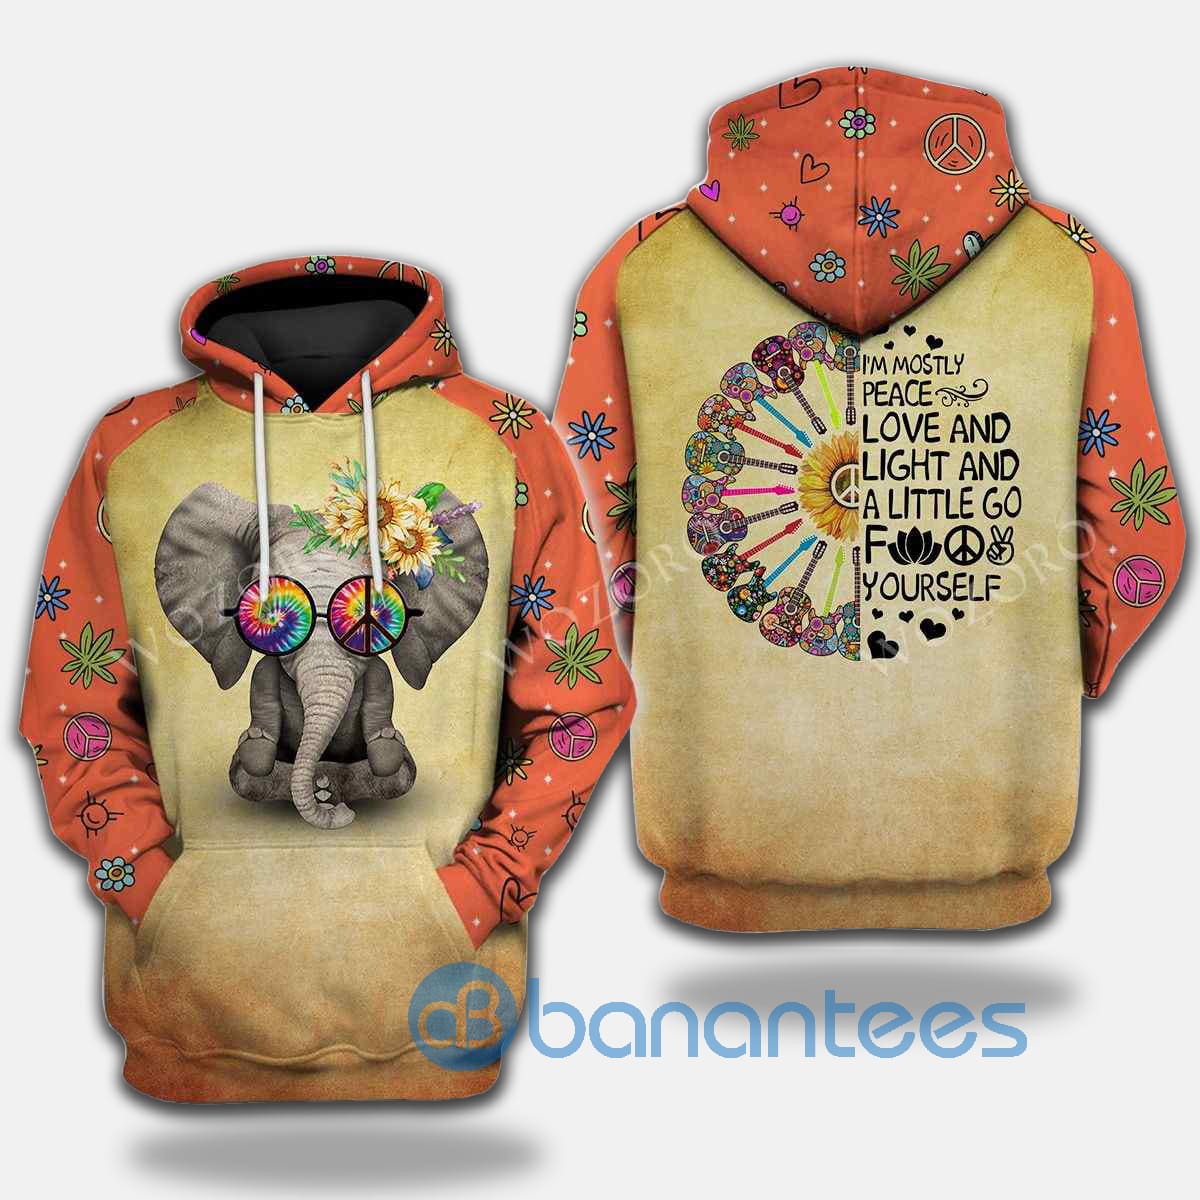 I'm Mostly Peace Love And Light Elephant Yoga Hippie All Over Print 3D Hoodie